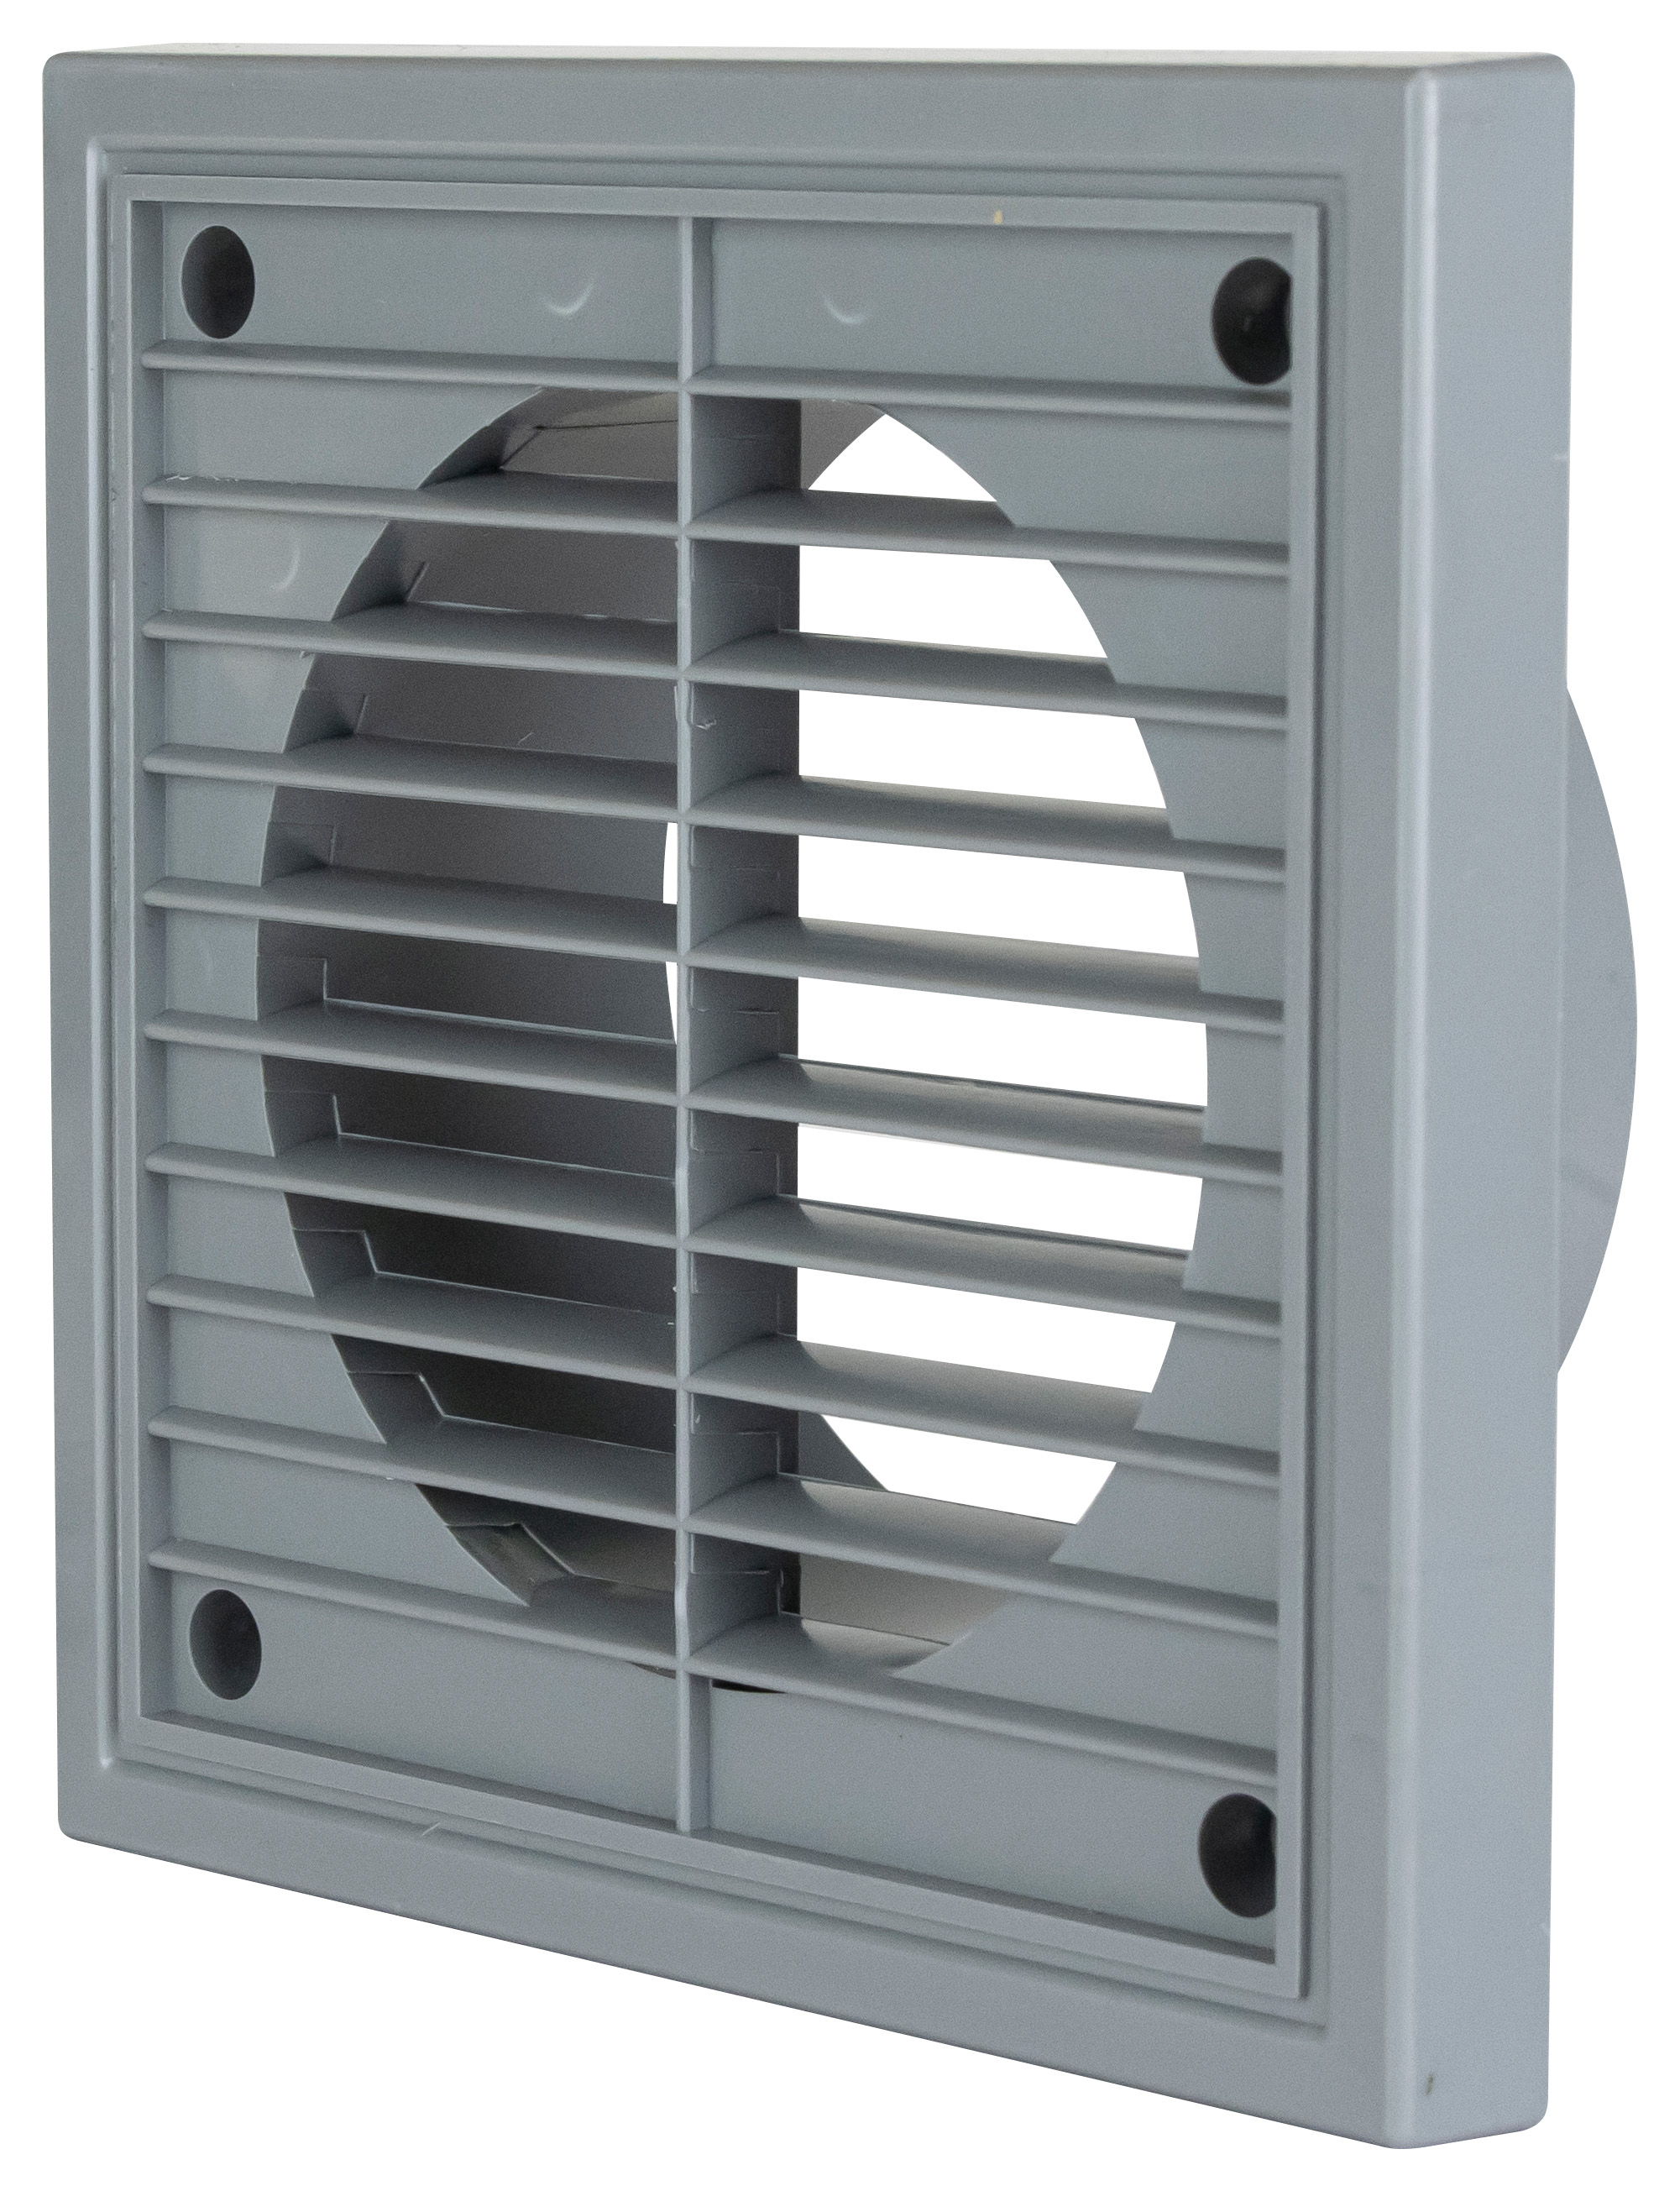 Manrose 100mm PVC Fixed Grille - Grey